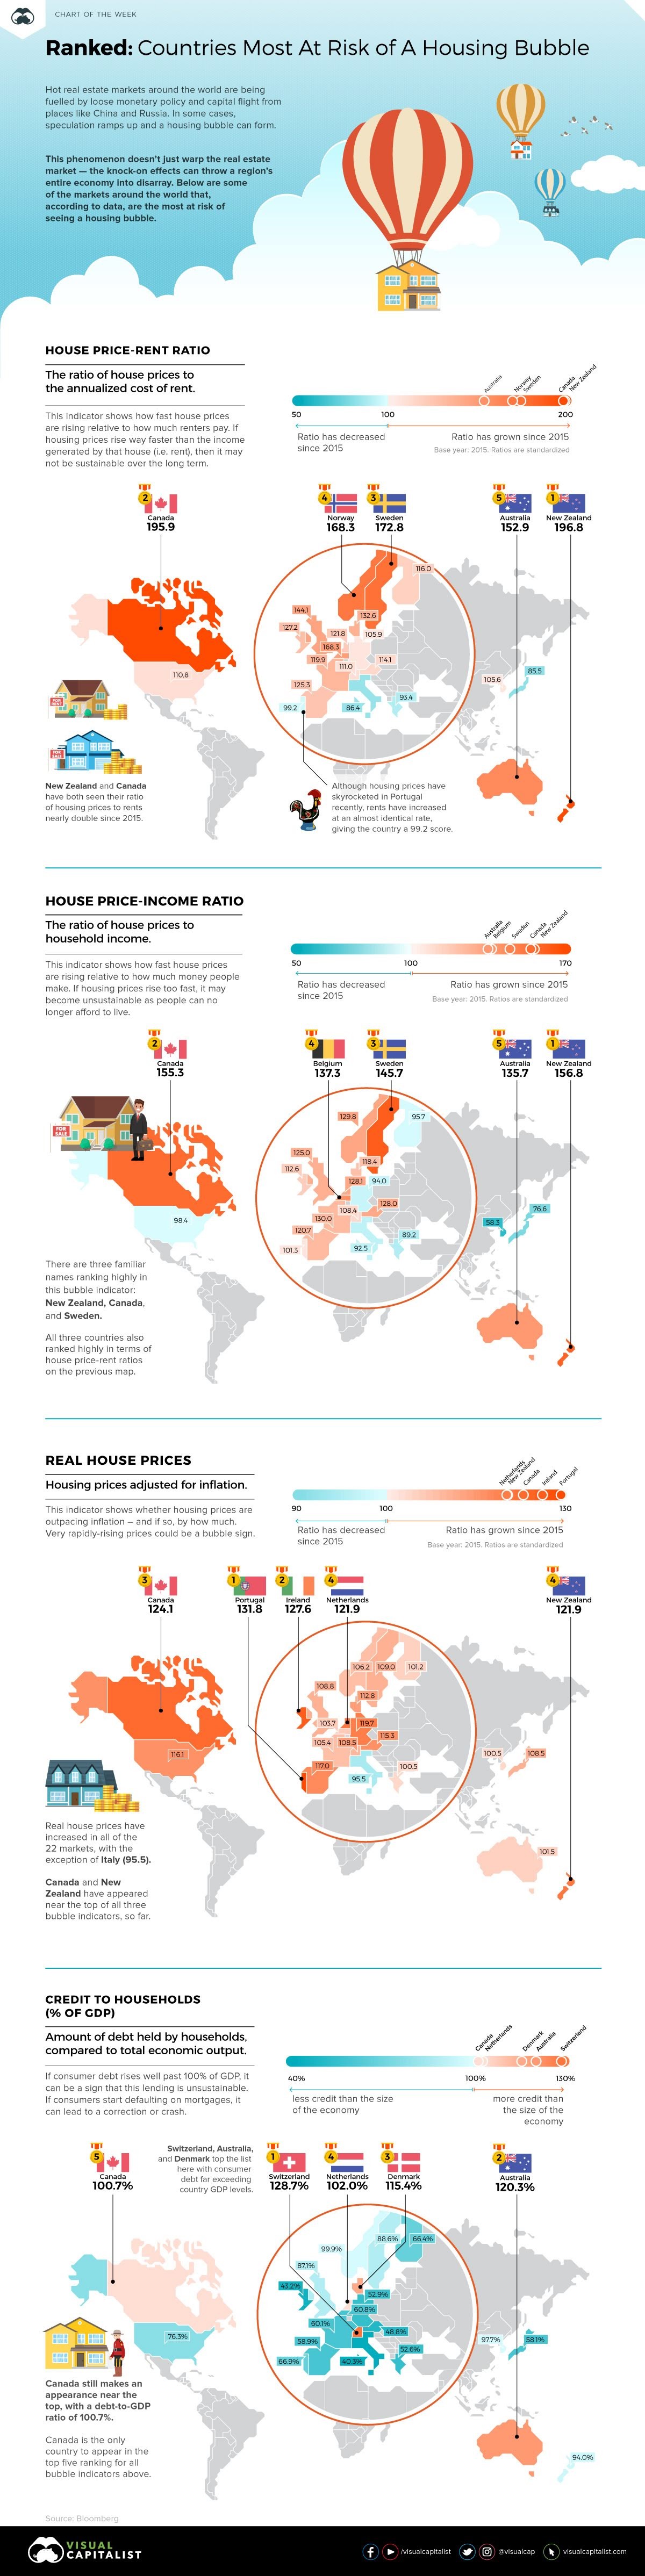 The Countries With the Highest Housing Bubble Risks #infographic